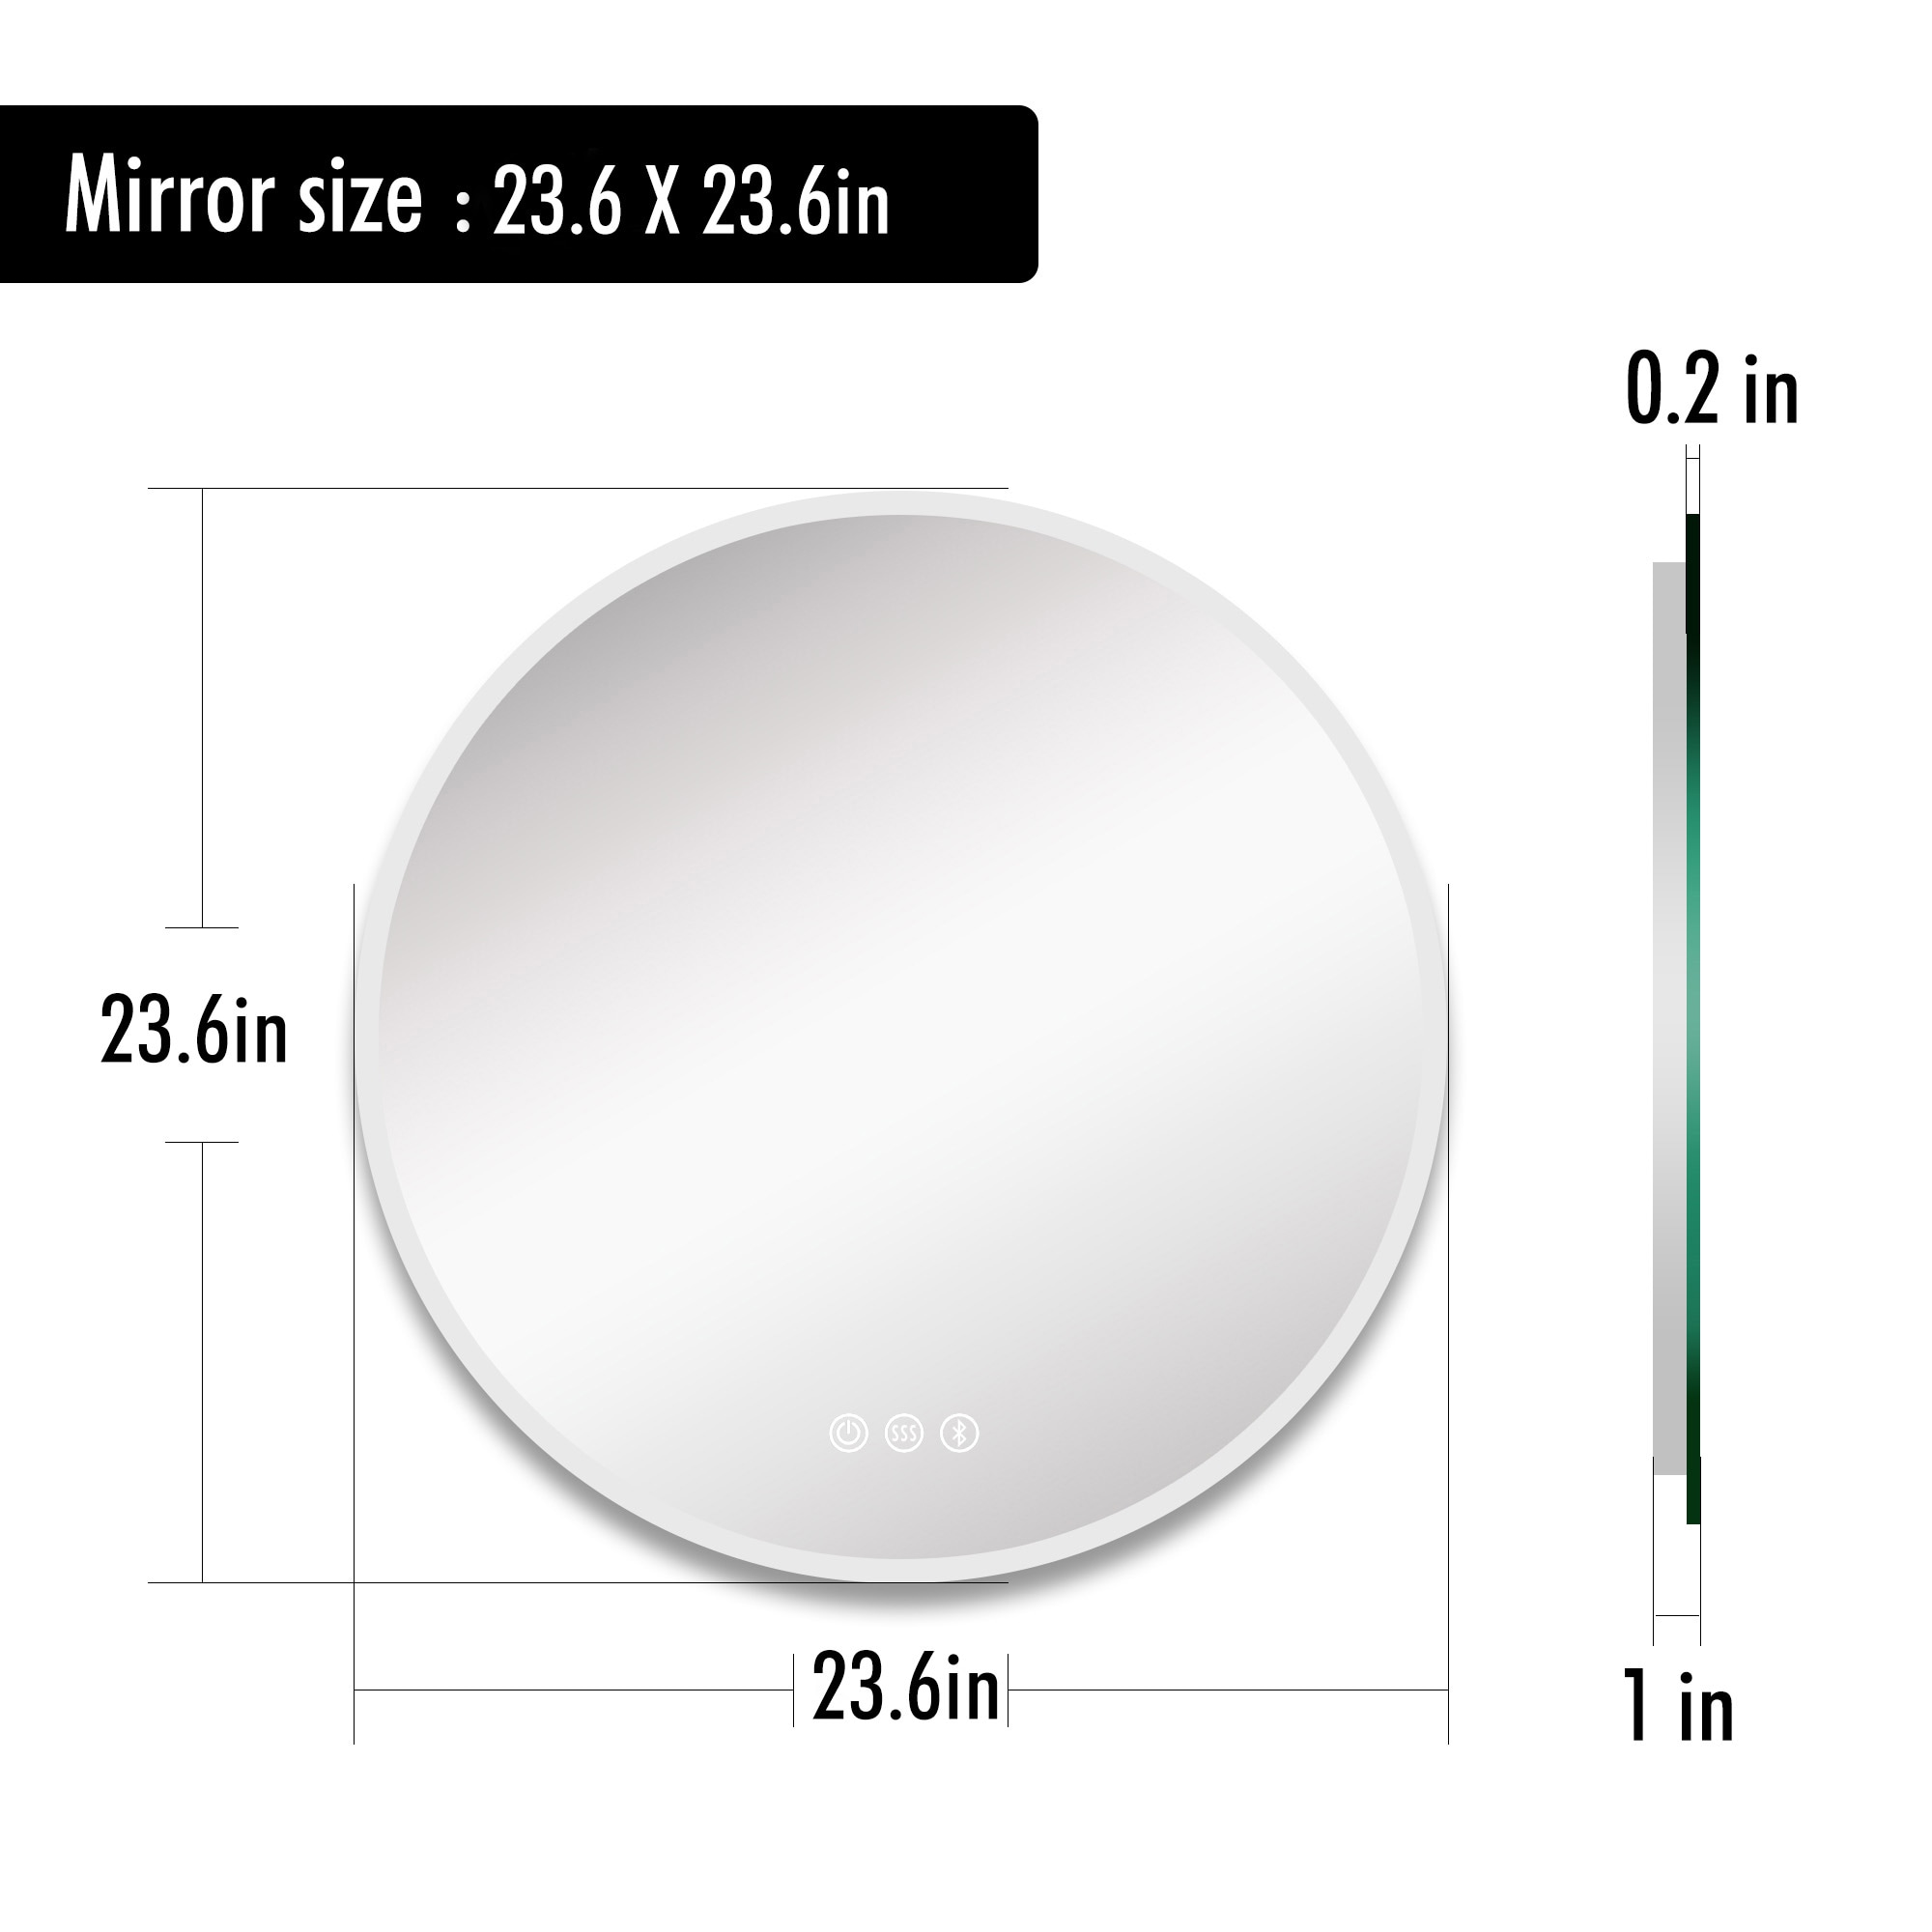 KINWELL Bathroom Mirror 23.6-in W x 23.6-in H LED Lighted White Round ...